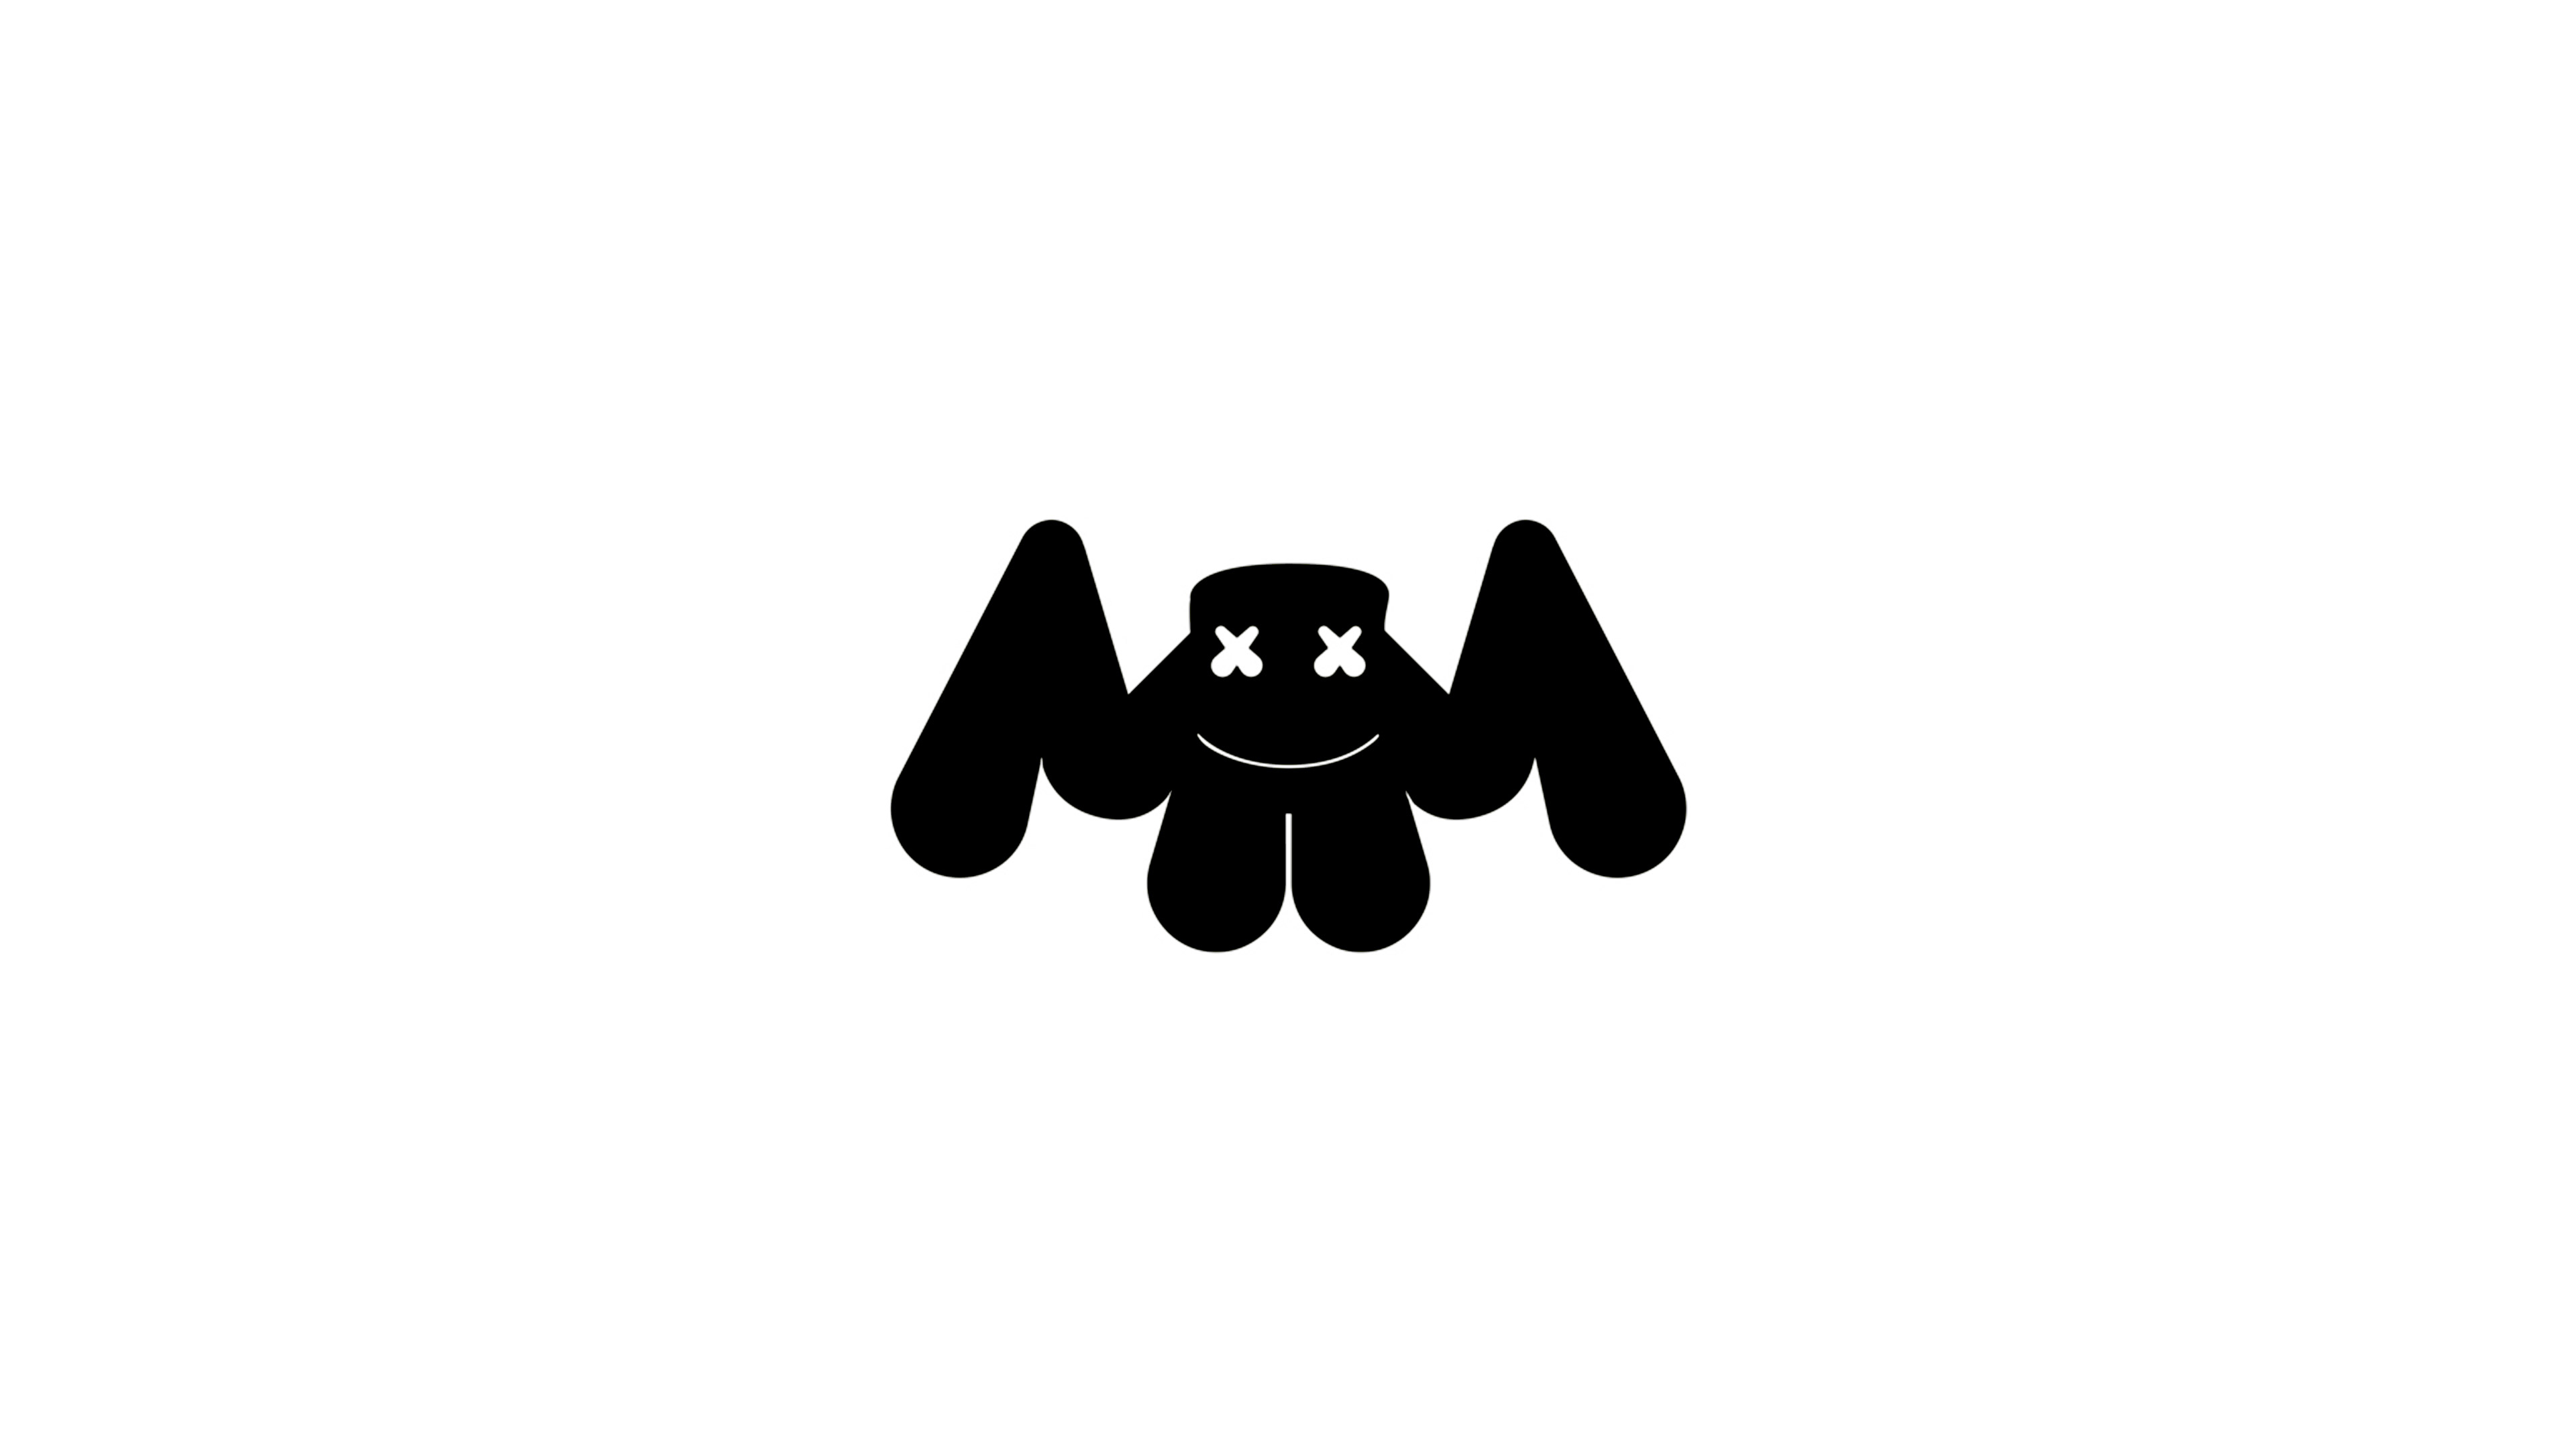 X marshmello logo white x resolution hd k wallpapers images backgrounds photos and pictures